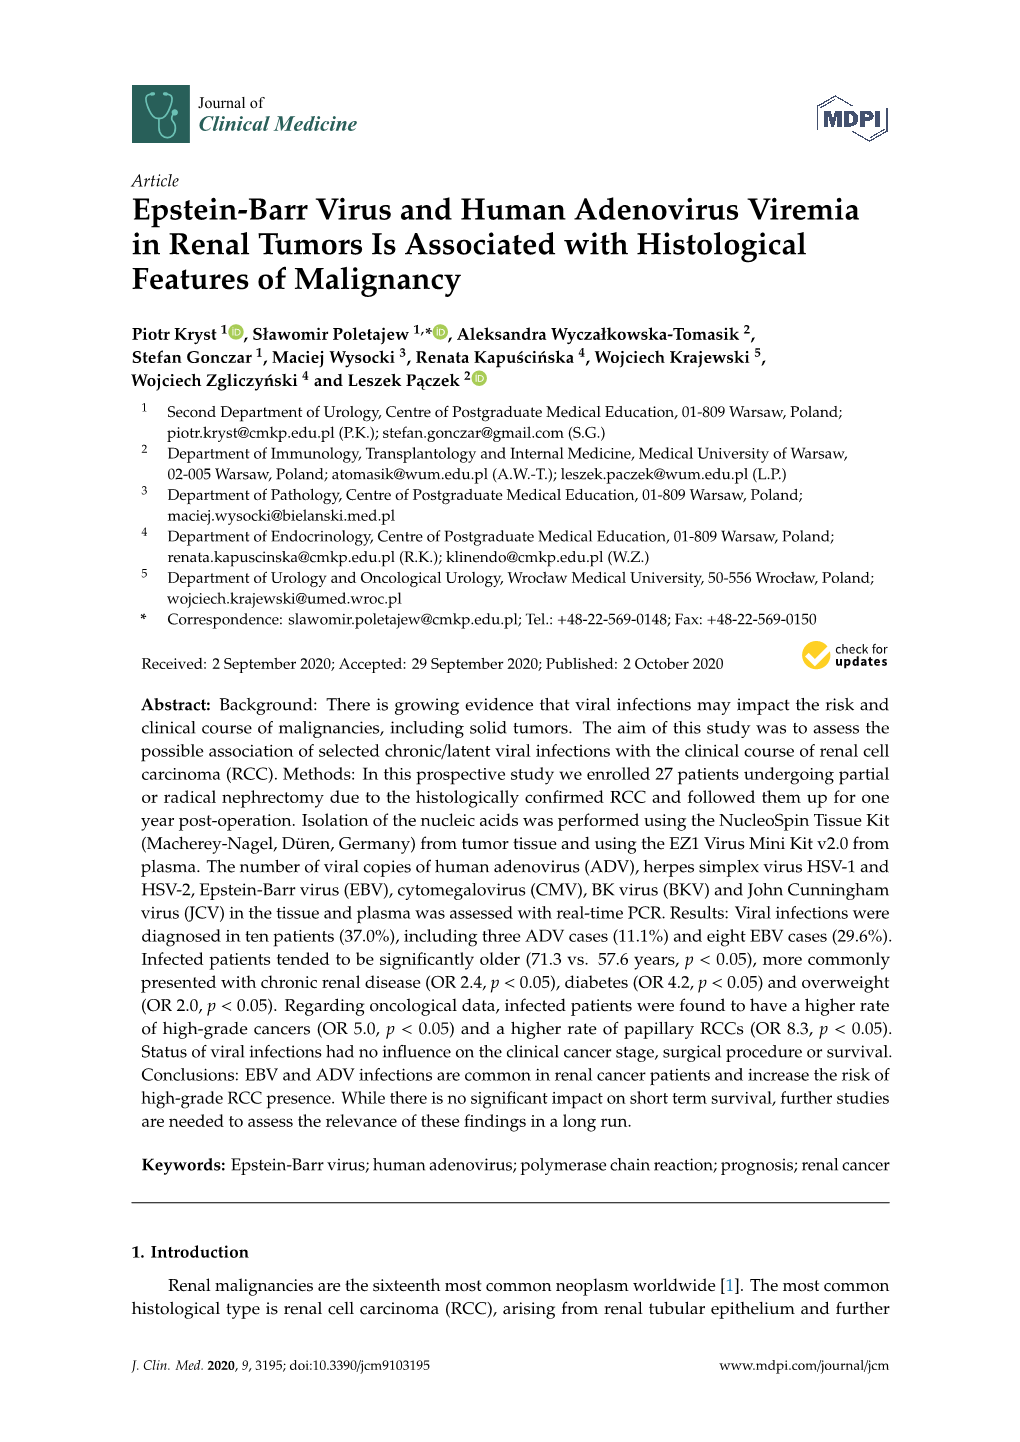 Epstein-Barr Virus and Human Adenovirus Viremia in Renal Tumors Is Associated with Histological Features of Malignancy